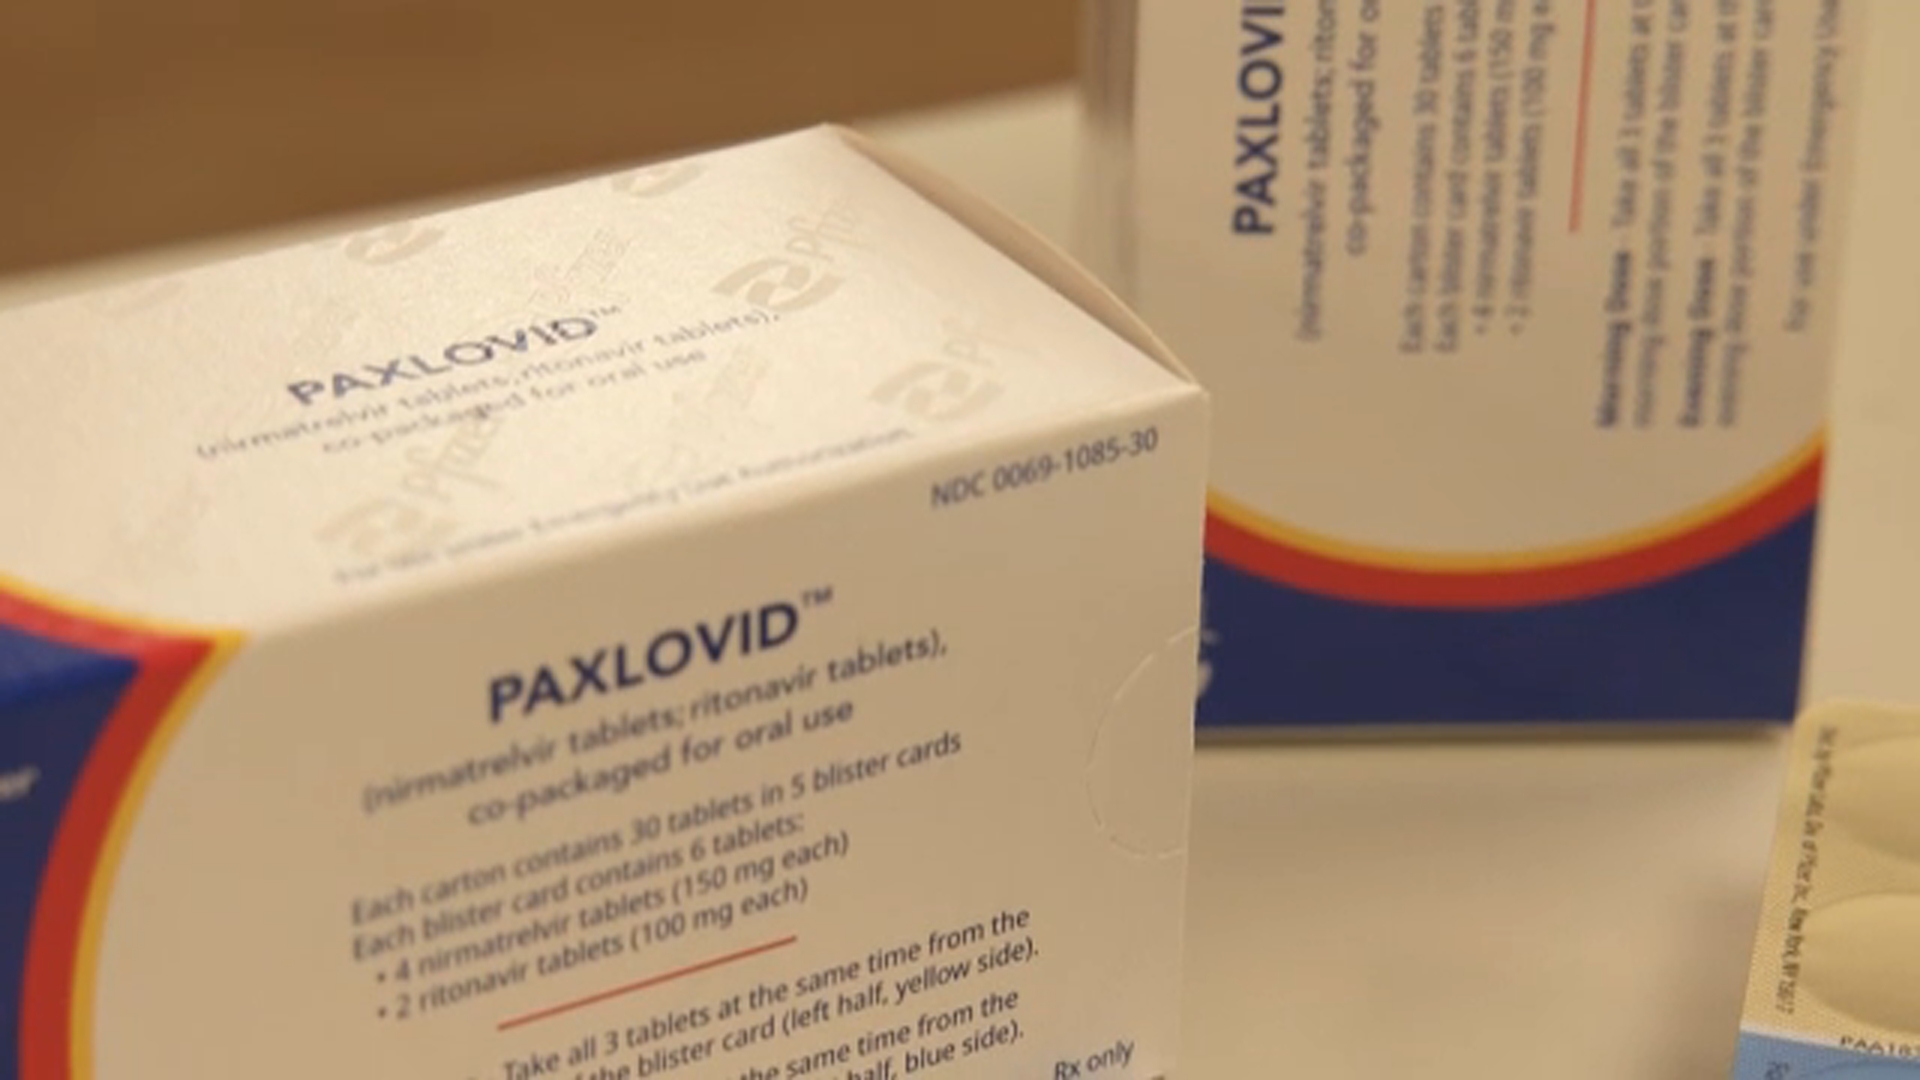 Black, Hispanic patients less likely to receive paxlovid COVID-19 treatment than white patients